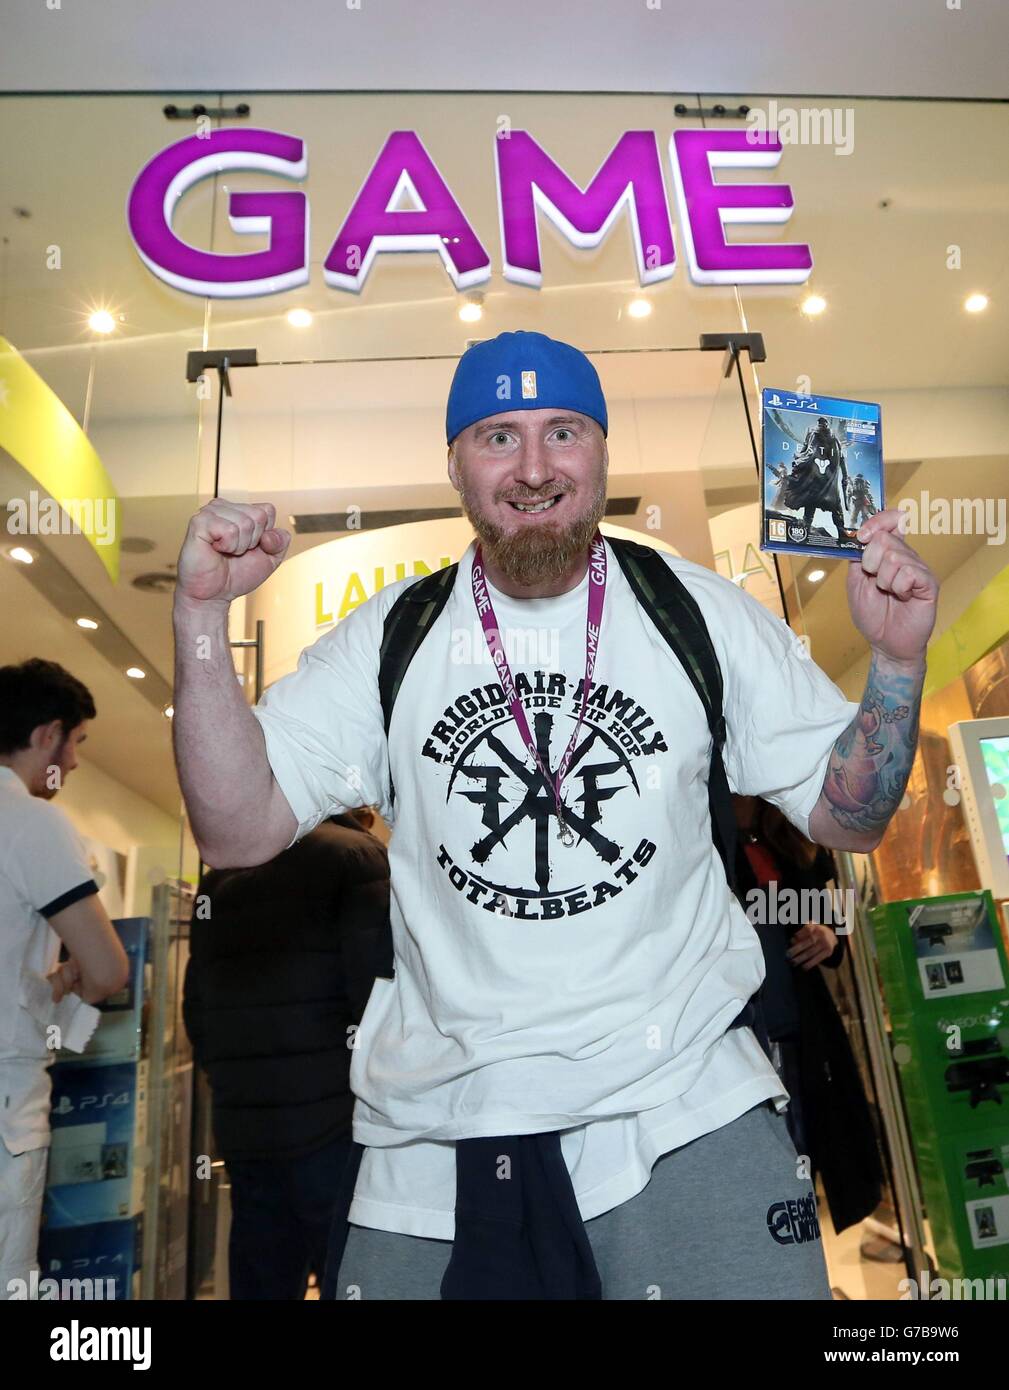 EDITORIAL USE ONLY Csaba Toth, 38 from Wood Green North London is the first person to pick up Destiny, the latest game from the creators of Halo, after its midnight release at GAME in Westfield Stratford City in London. PRESS ASSOCIATION Picture date: Monday September 8, 2014. Photo credit should read: Matt Alexander/PA Stock Photo